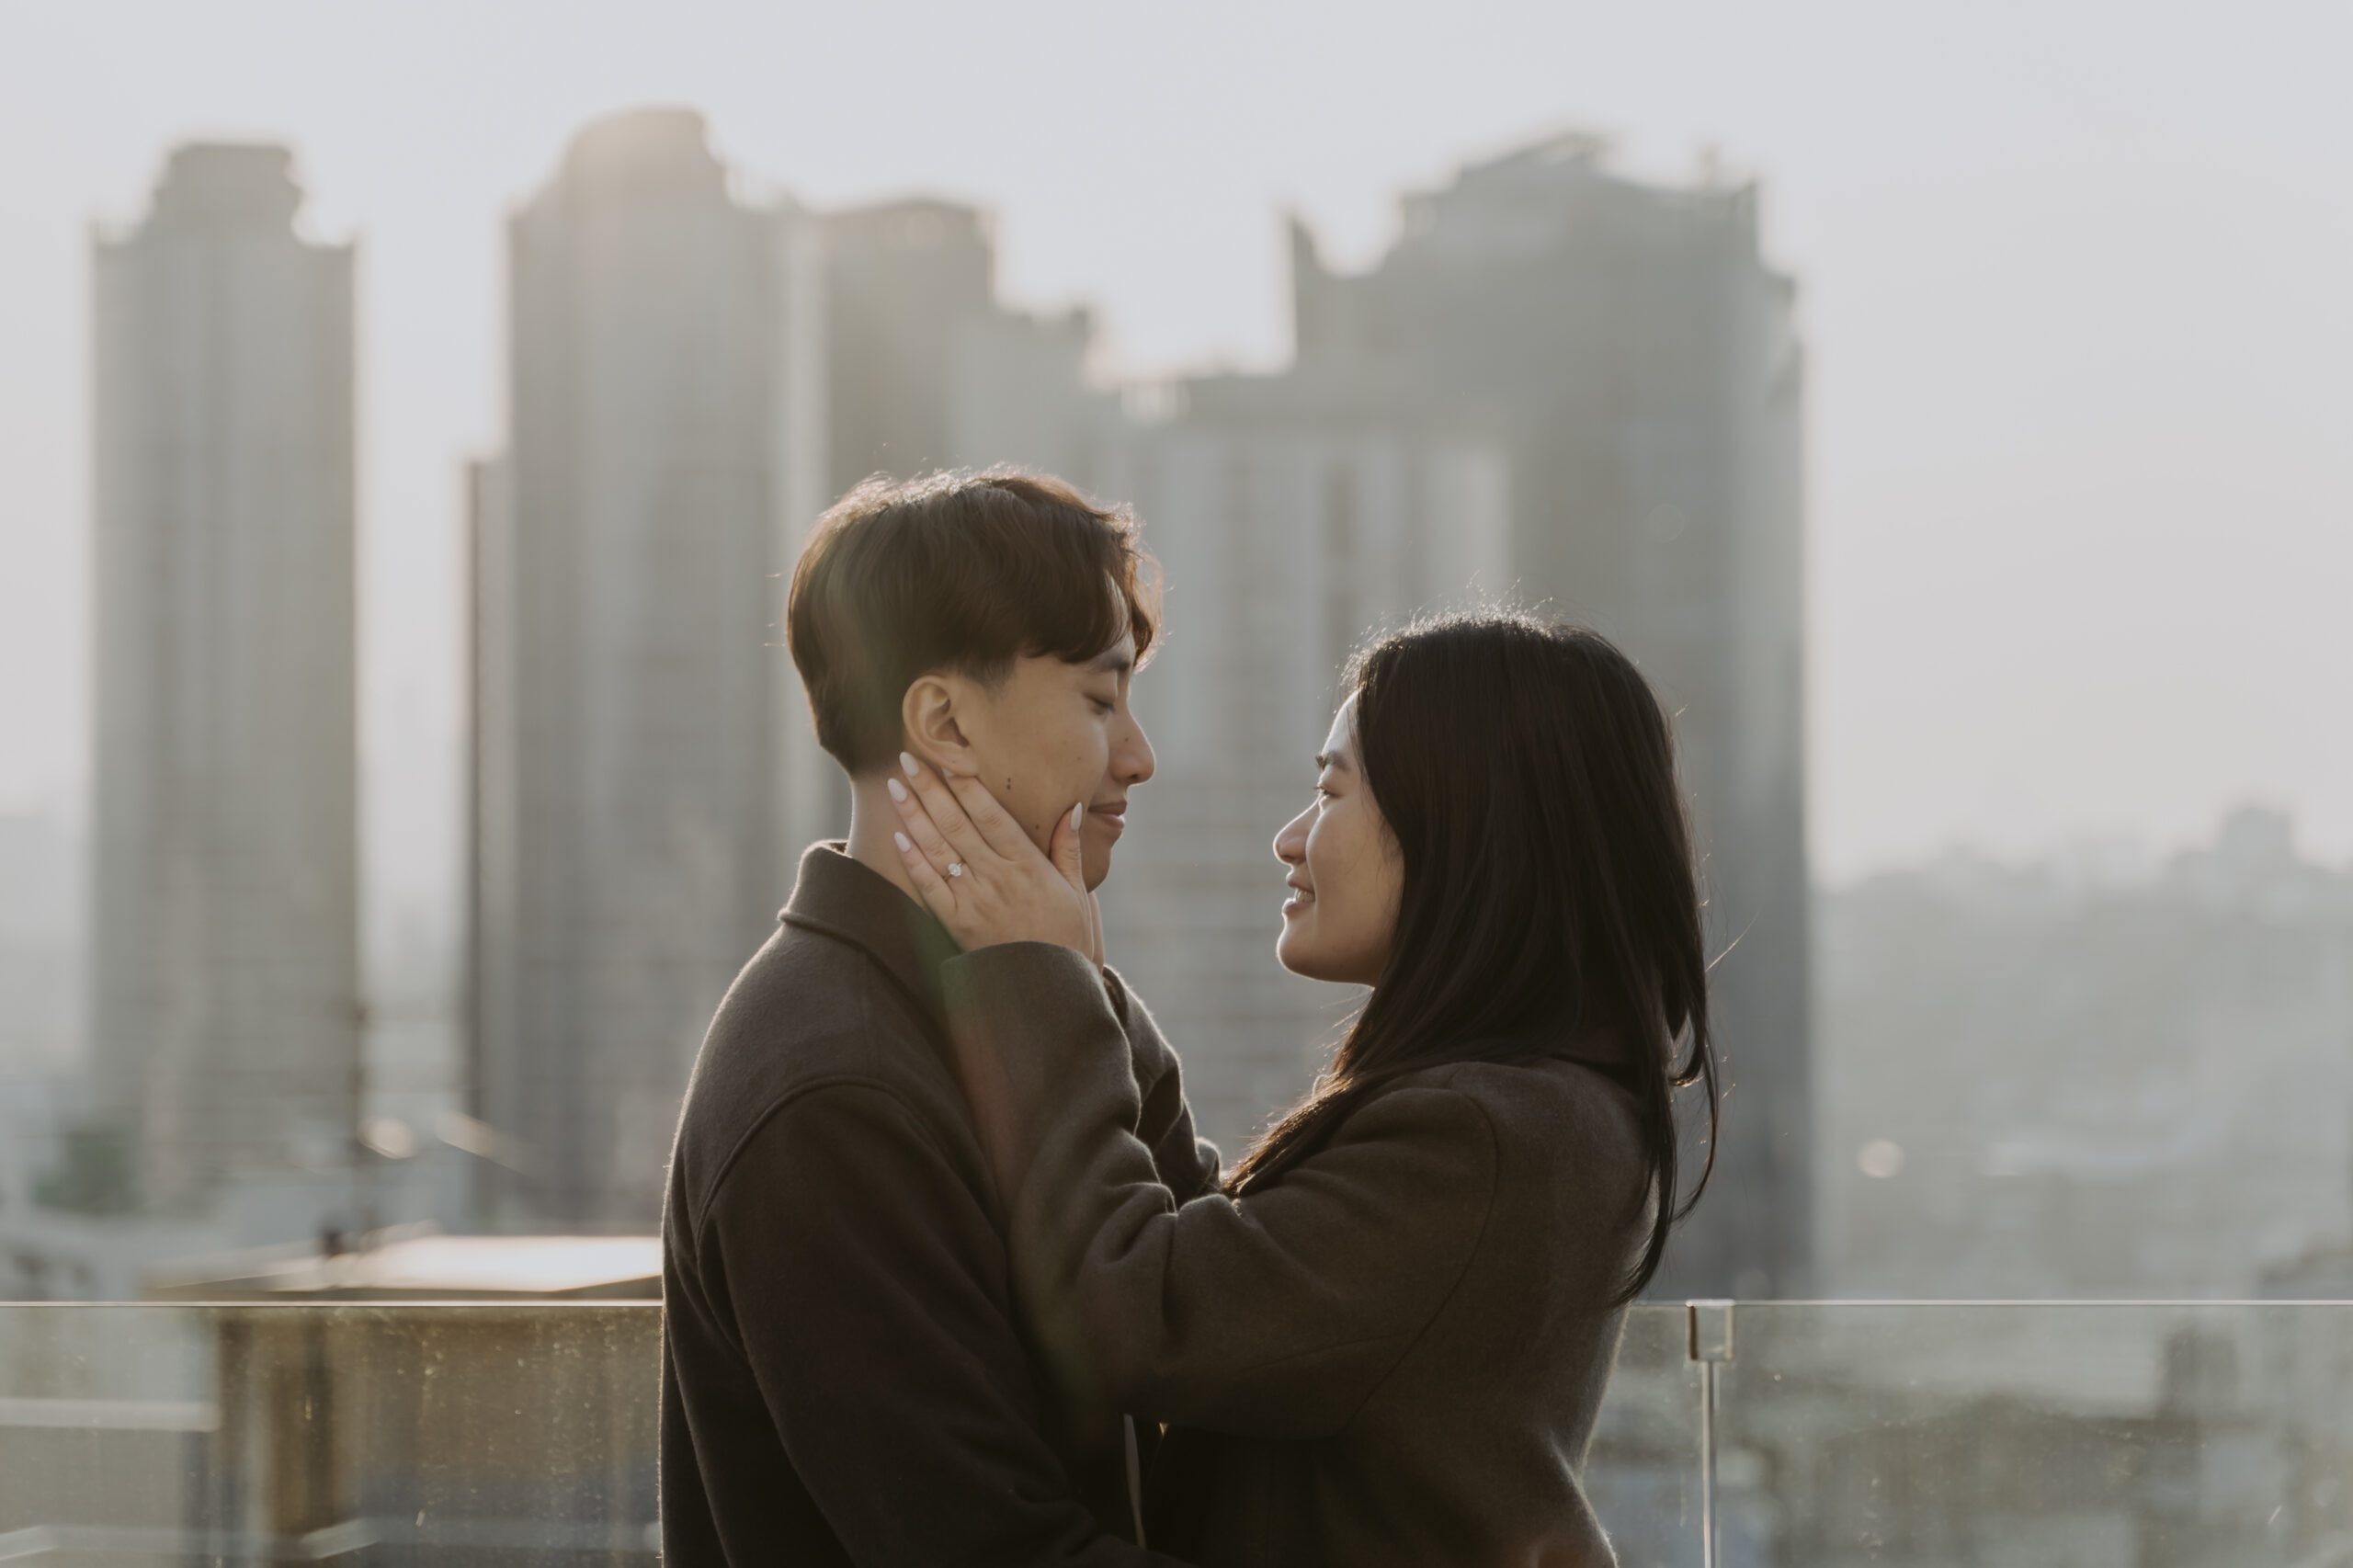 Two individuals sharing a tender moment on a rooftop with cityscape background.